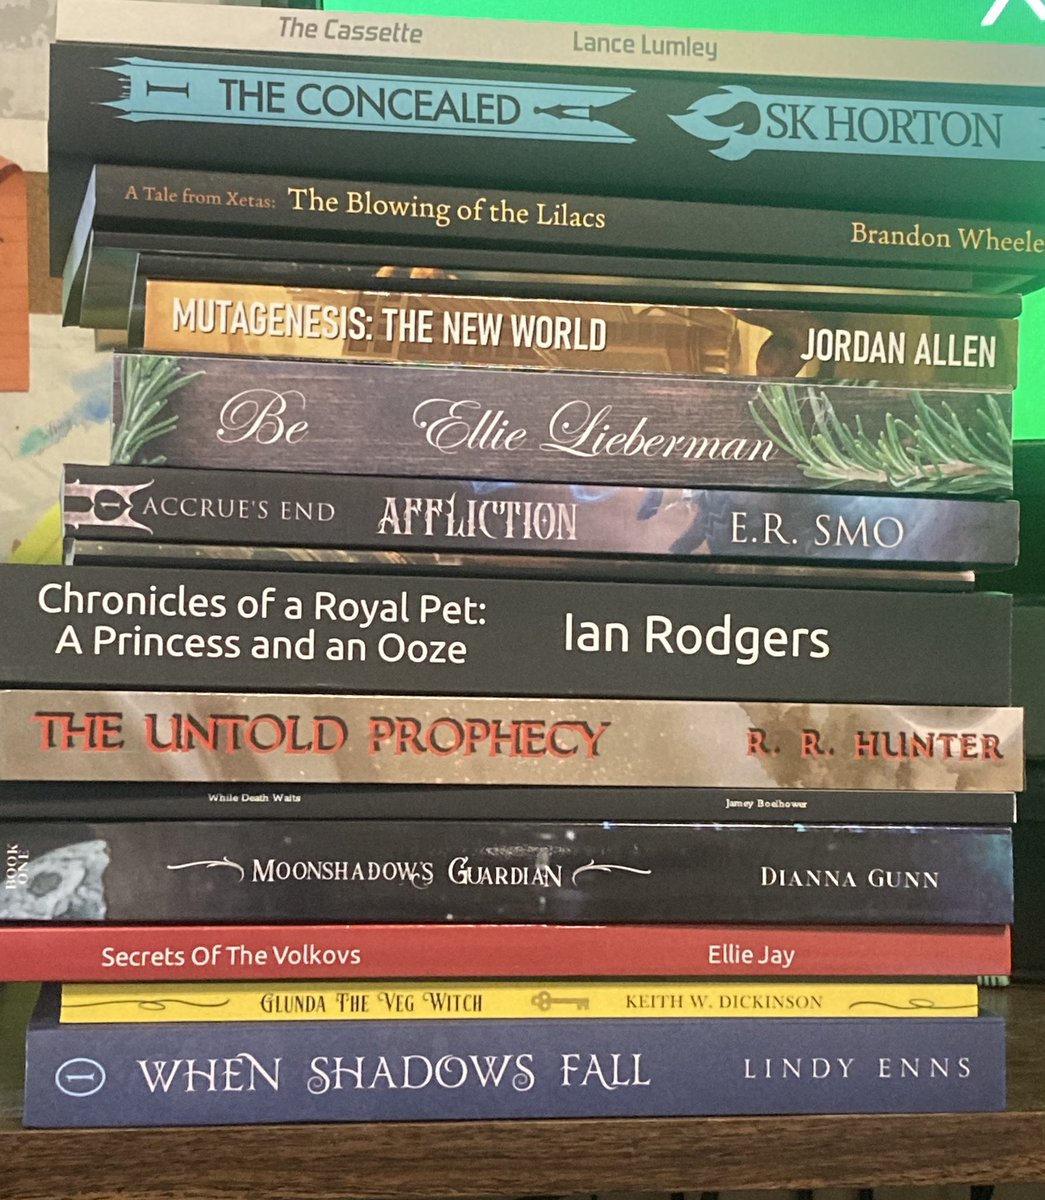 I should not have spent this money. But I promised and wanted to support other authors so I did. Y’all were just too good. This was my #IndieApril and I got 6 free ebooks. Will read and review when possible. (One isn’t indie, but I’m counting it.) #TBR